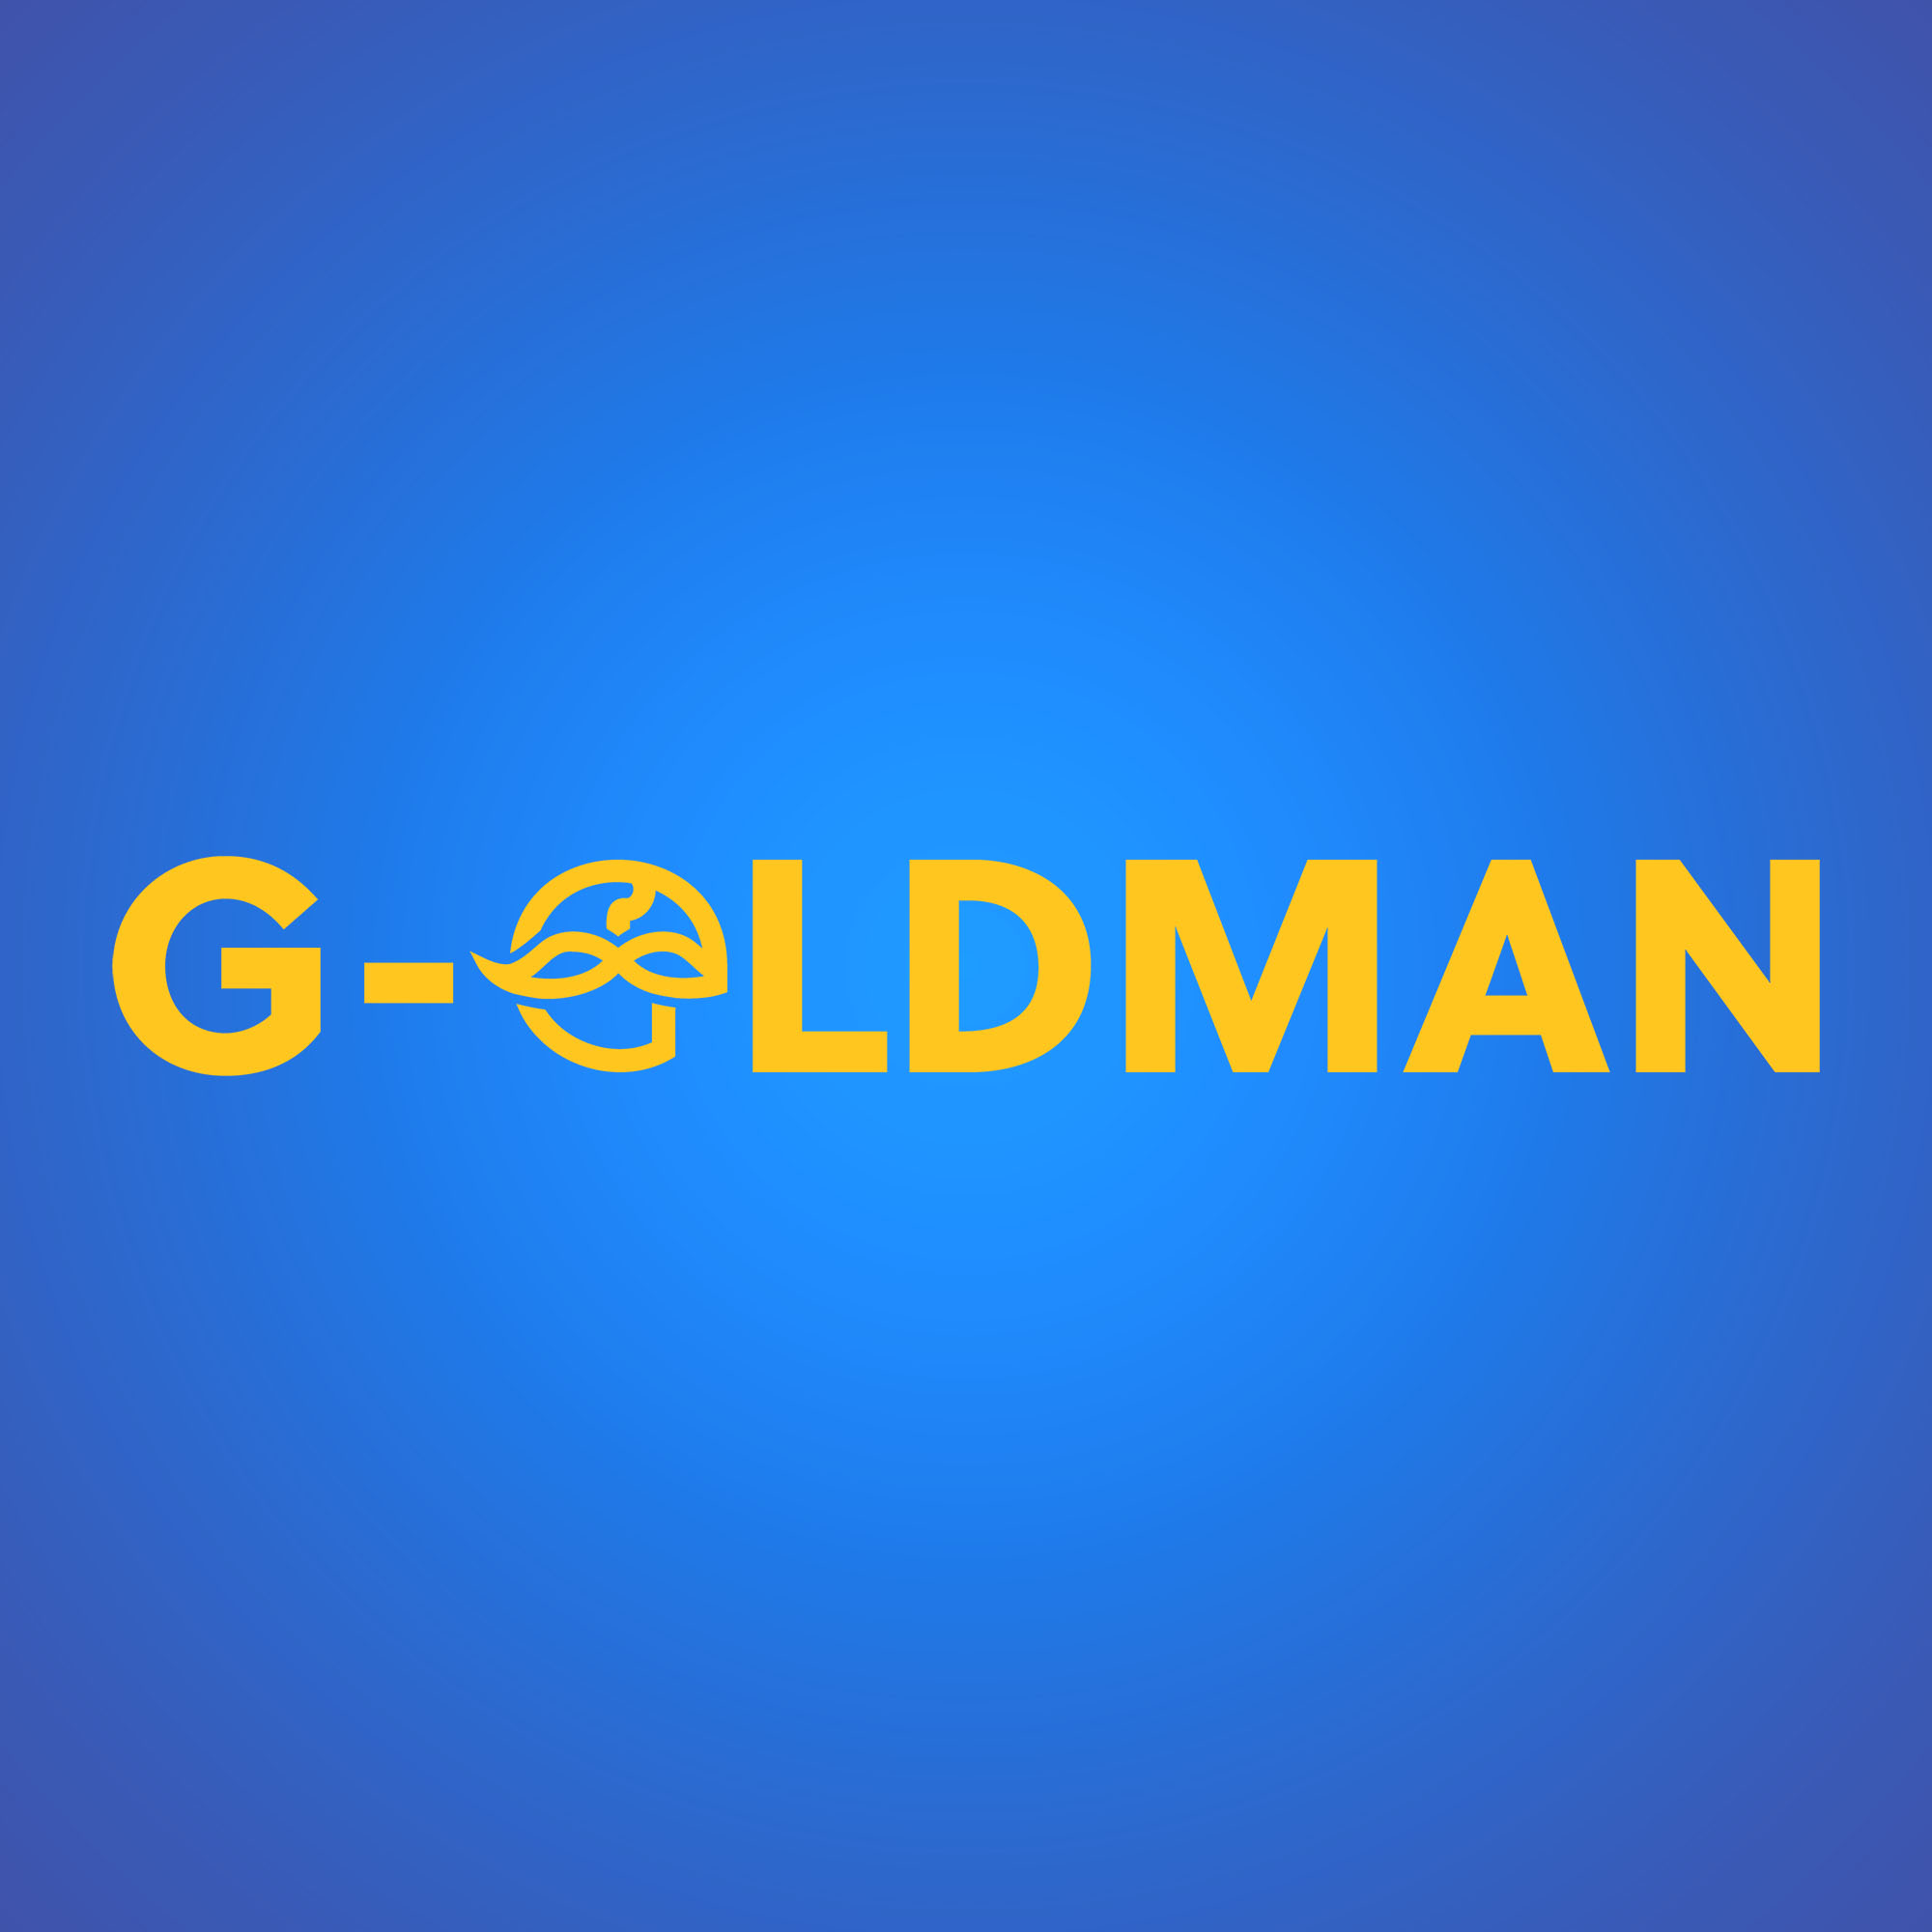 G-OLDMAN Releases Exclusive NFT Fashion Brand for Its Growing Community